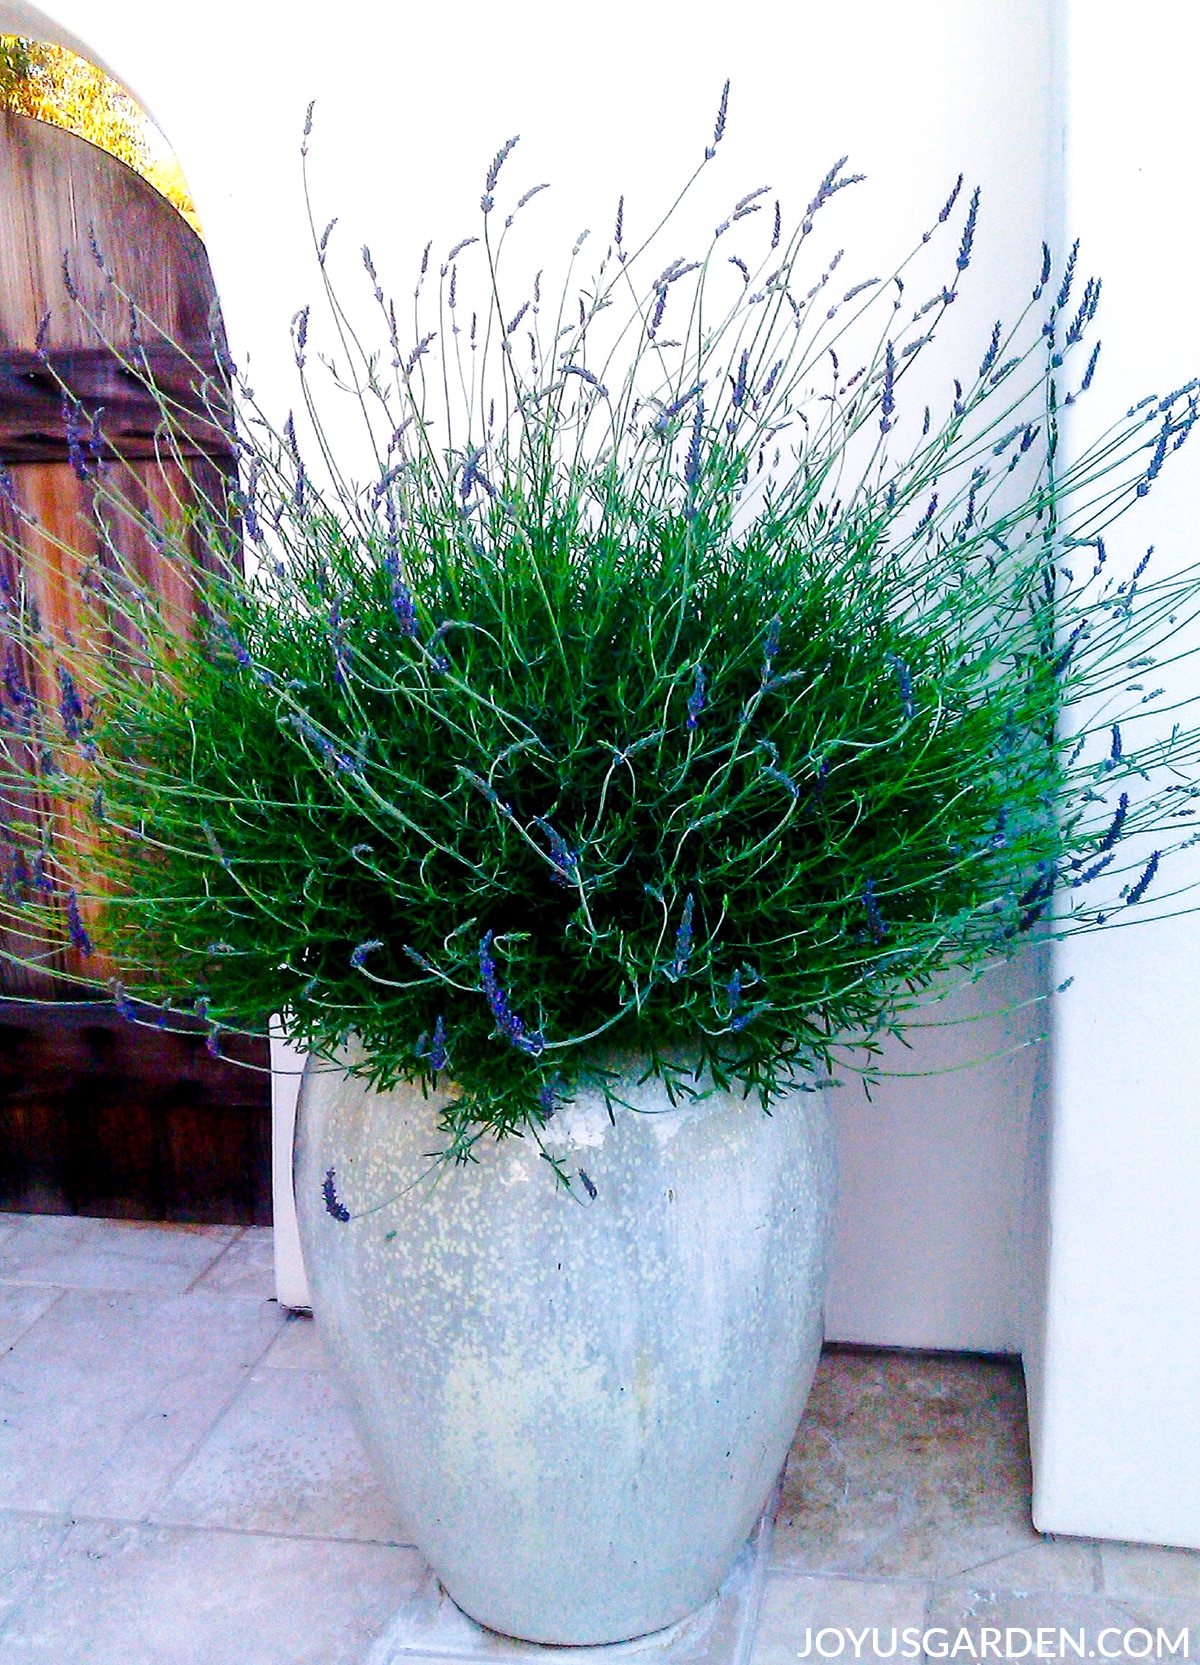 A large lavender in full bloom grows in a tall rounded light blue opalescent pot.